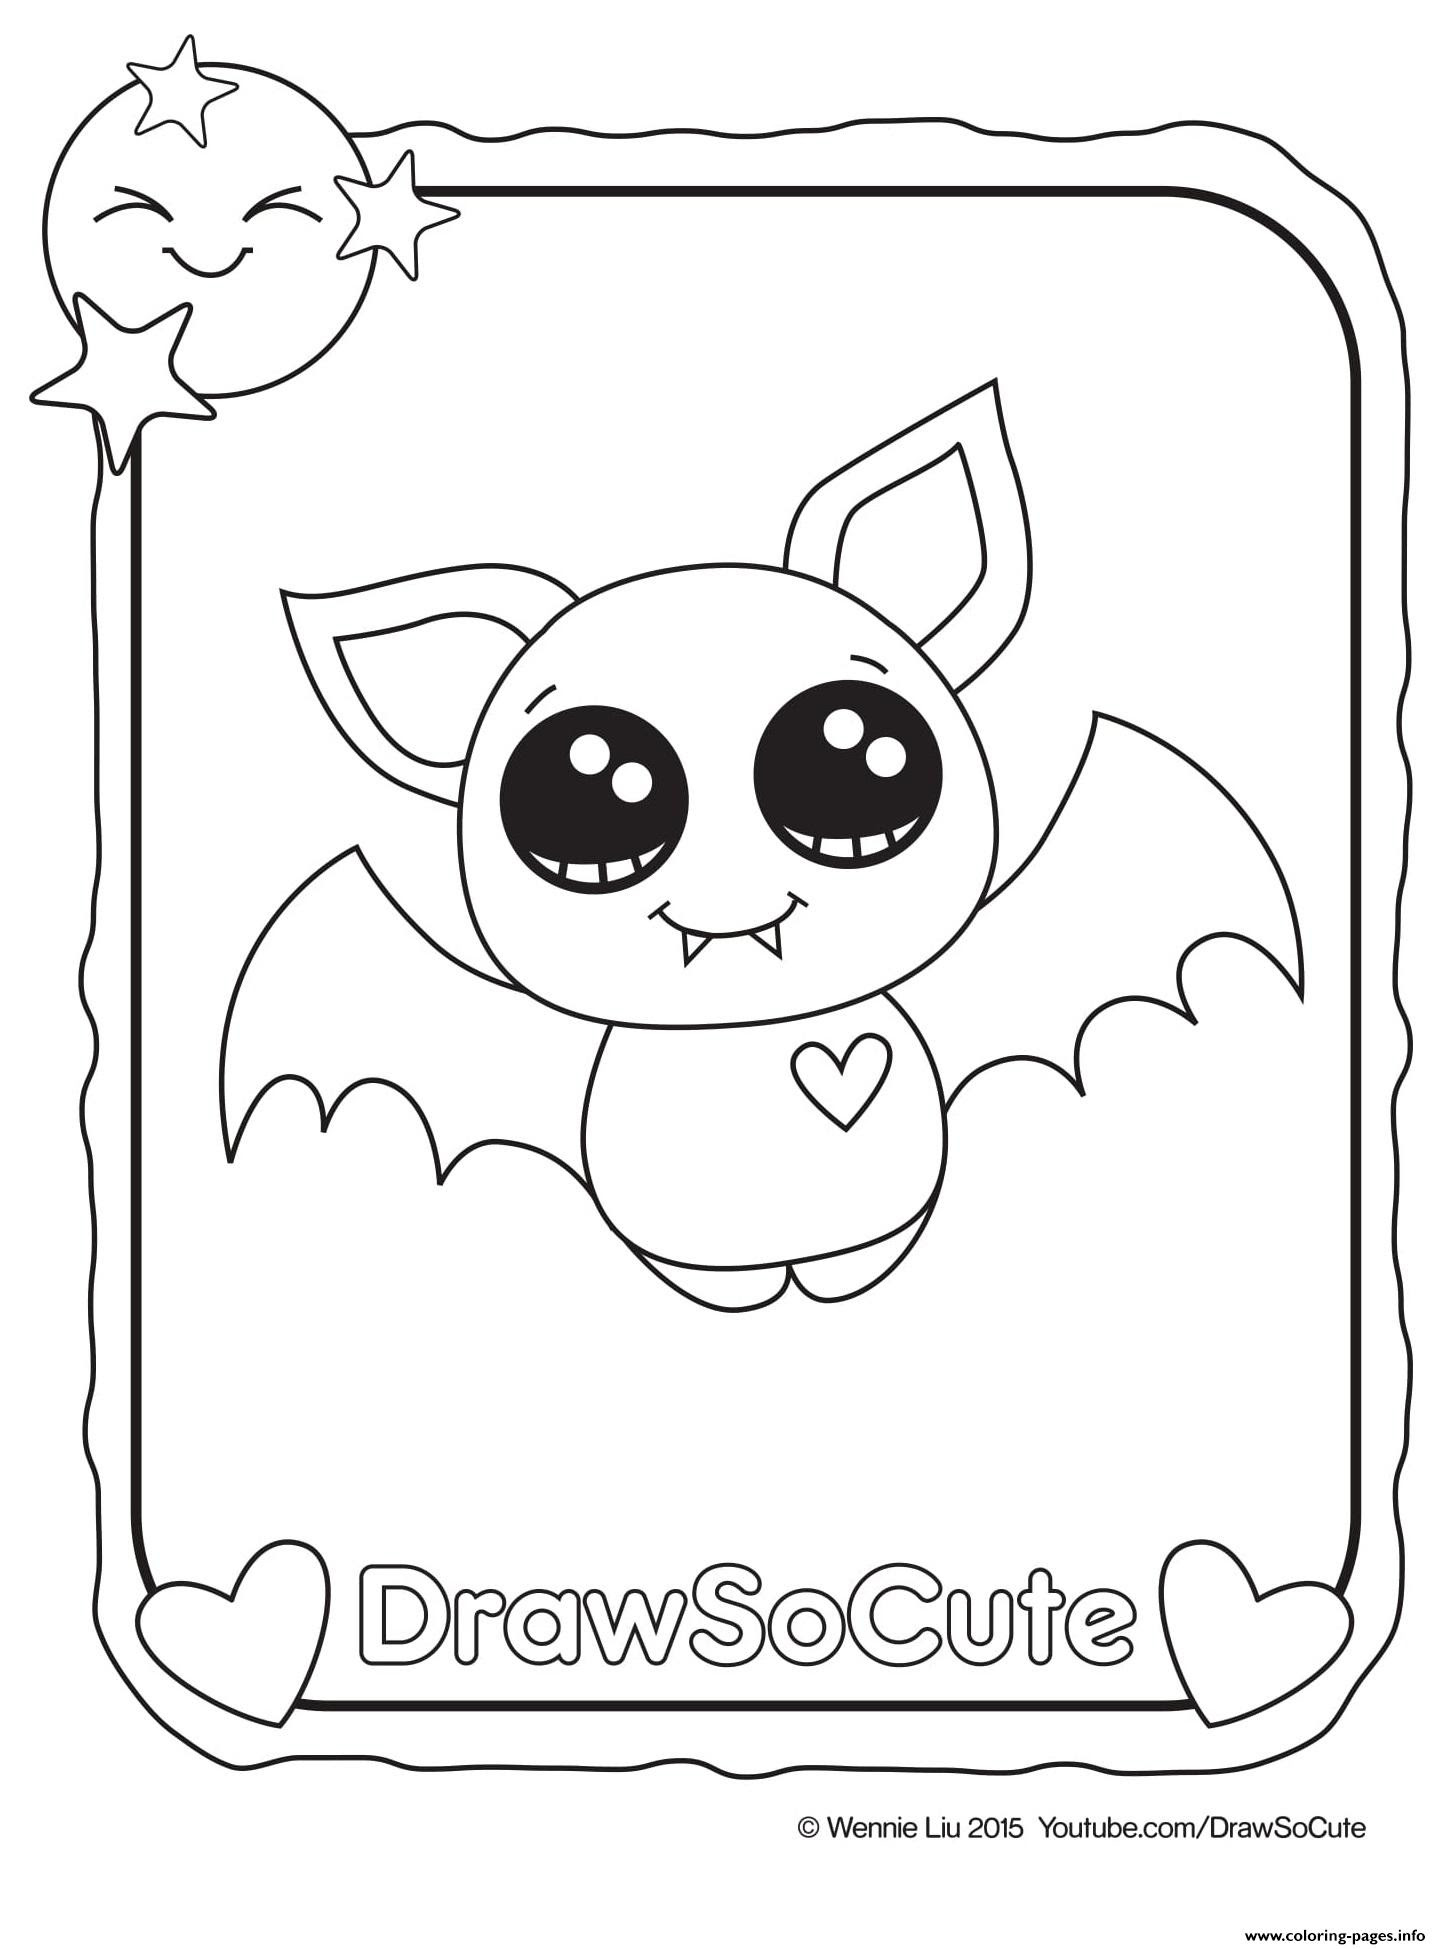 New Coloring Notebook Pages Free Drawsocute Com | Top Free Printable